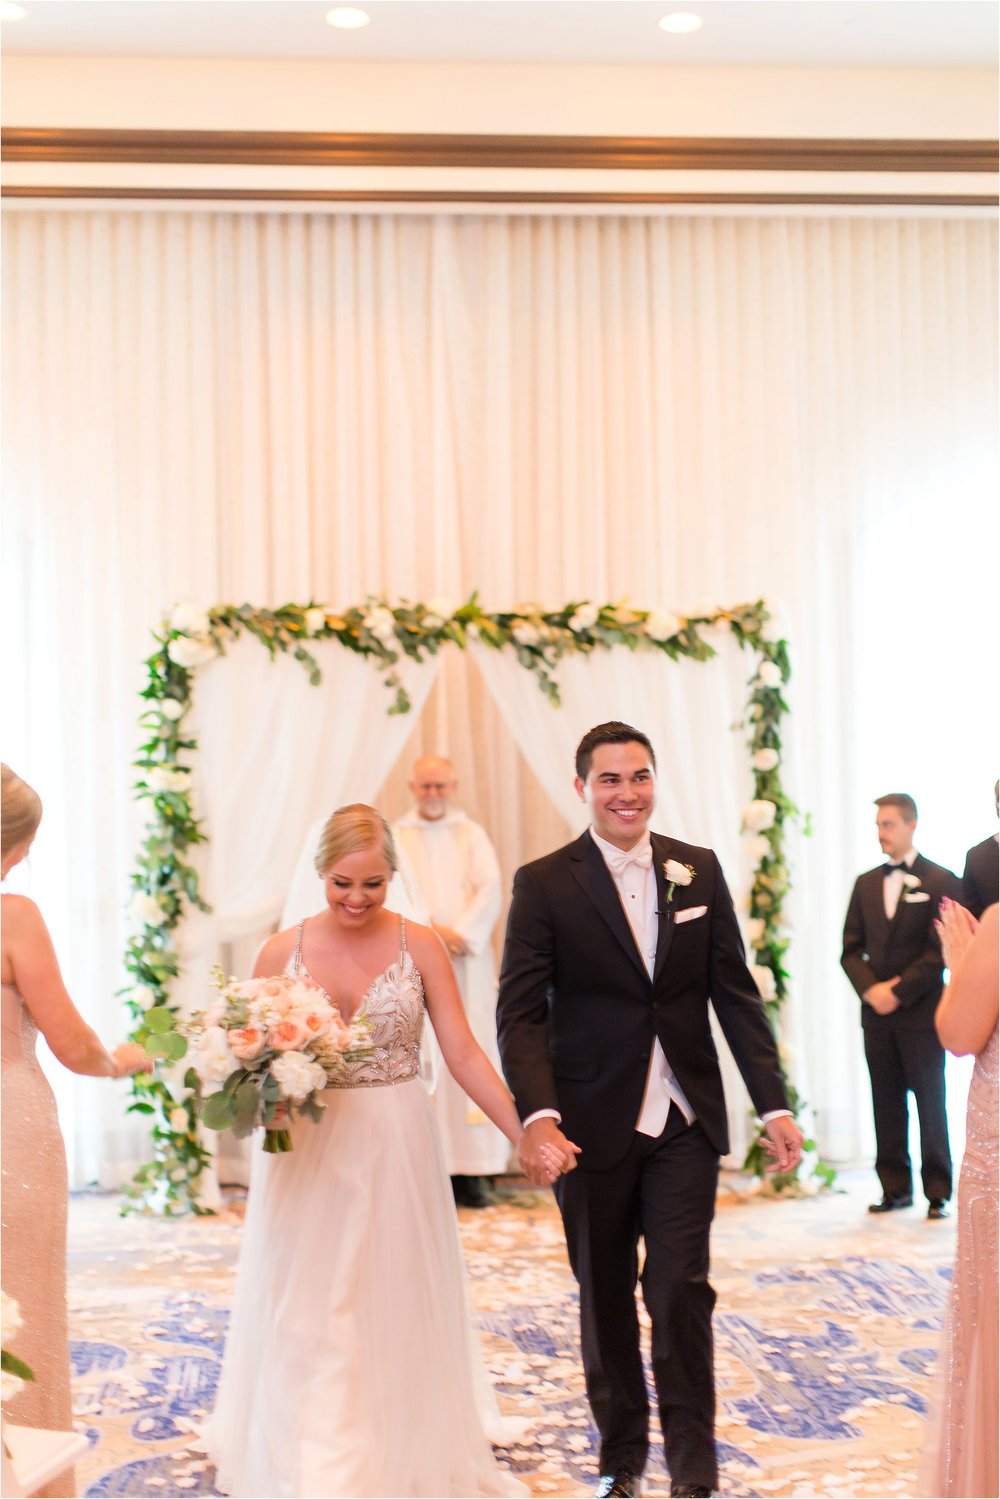 Indoor Ceremony at Wyndham Grand Resort at Bonnet Creek wedding by PSJ Photography 